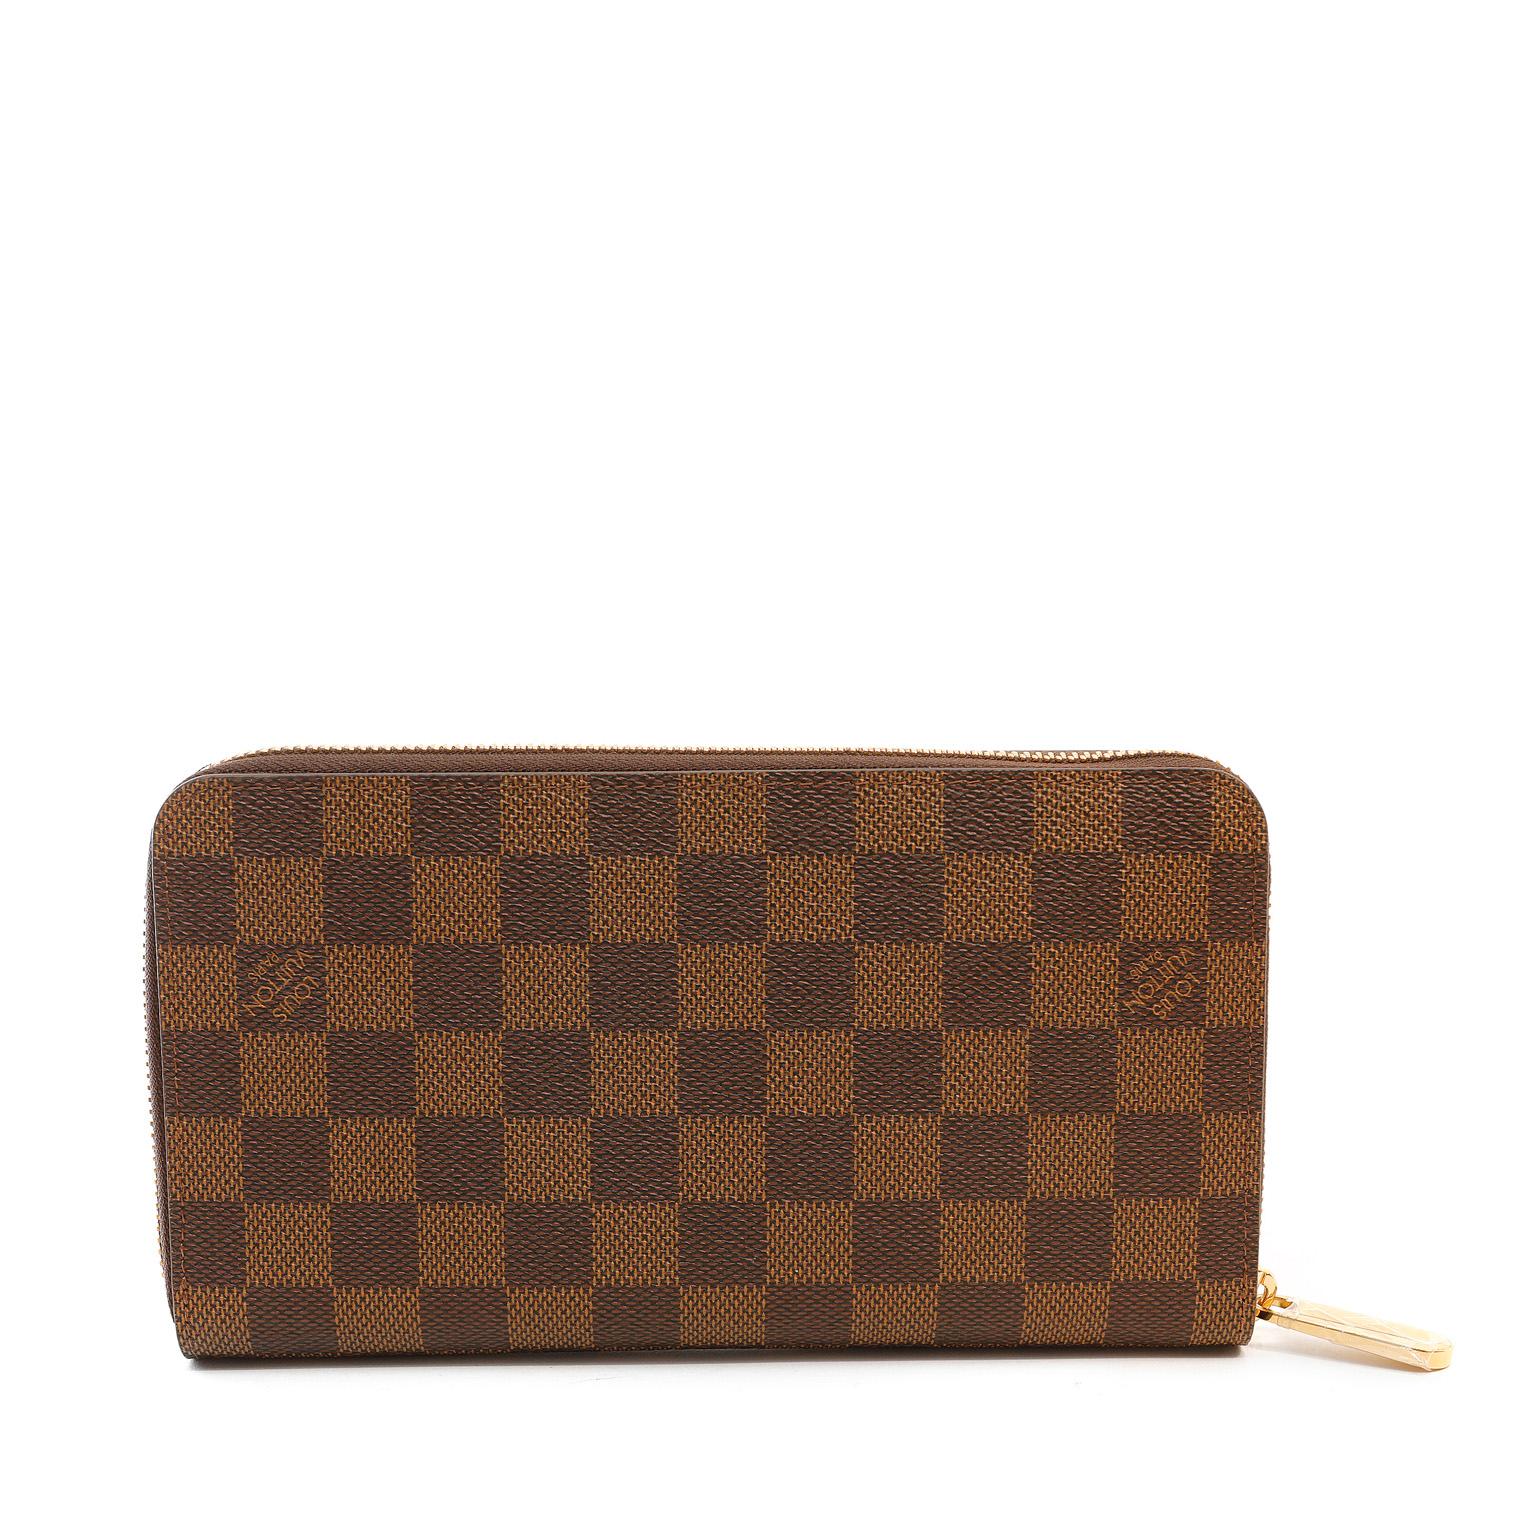 This authentic Louis Vuitton Damier Ebene Zippy Wallet is in pristine condition.   Signature LV checkered pattern in tobacco and deep brown with gold tone zipper.  Leather interior easily manages coins, cards and currency in an organized fashion. 